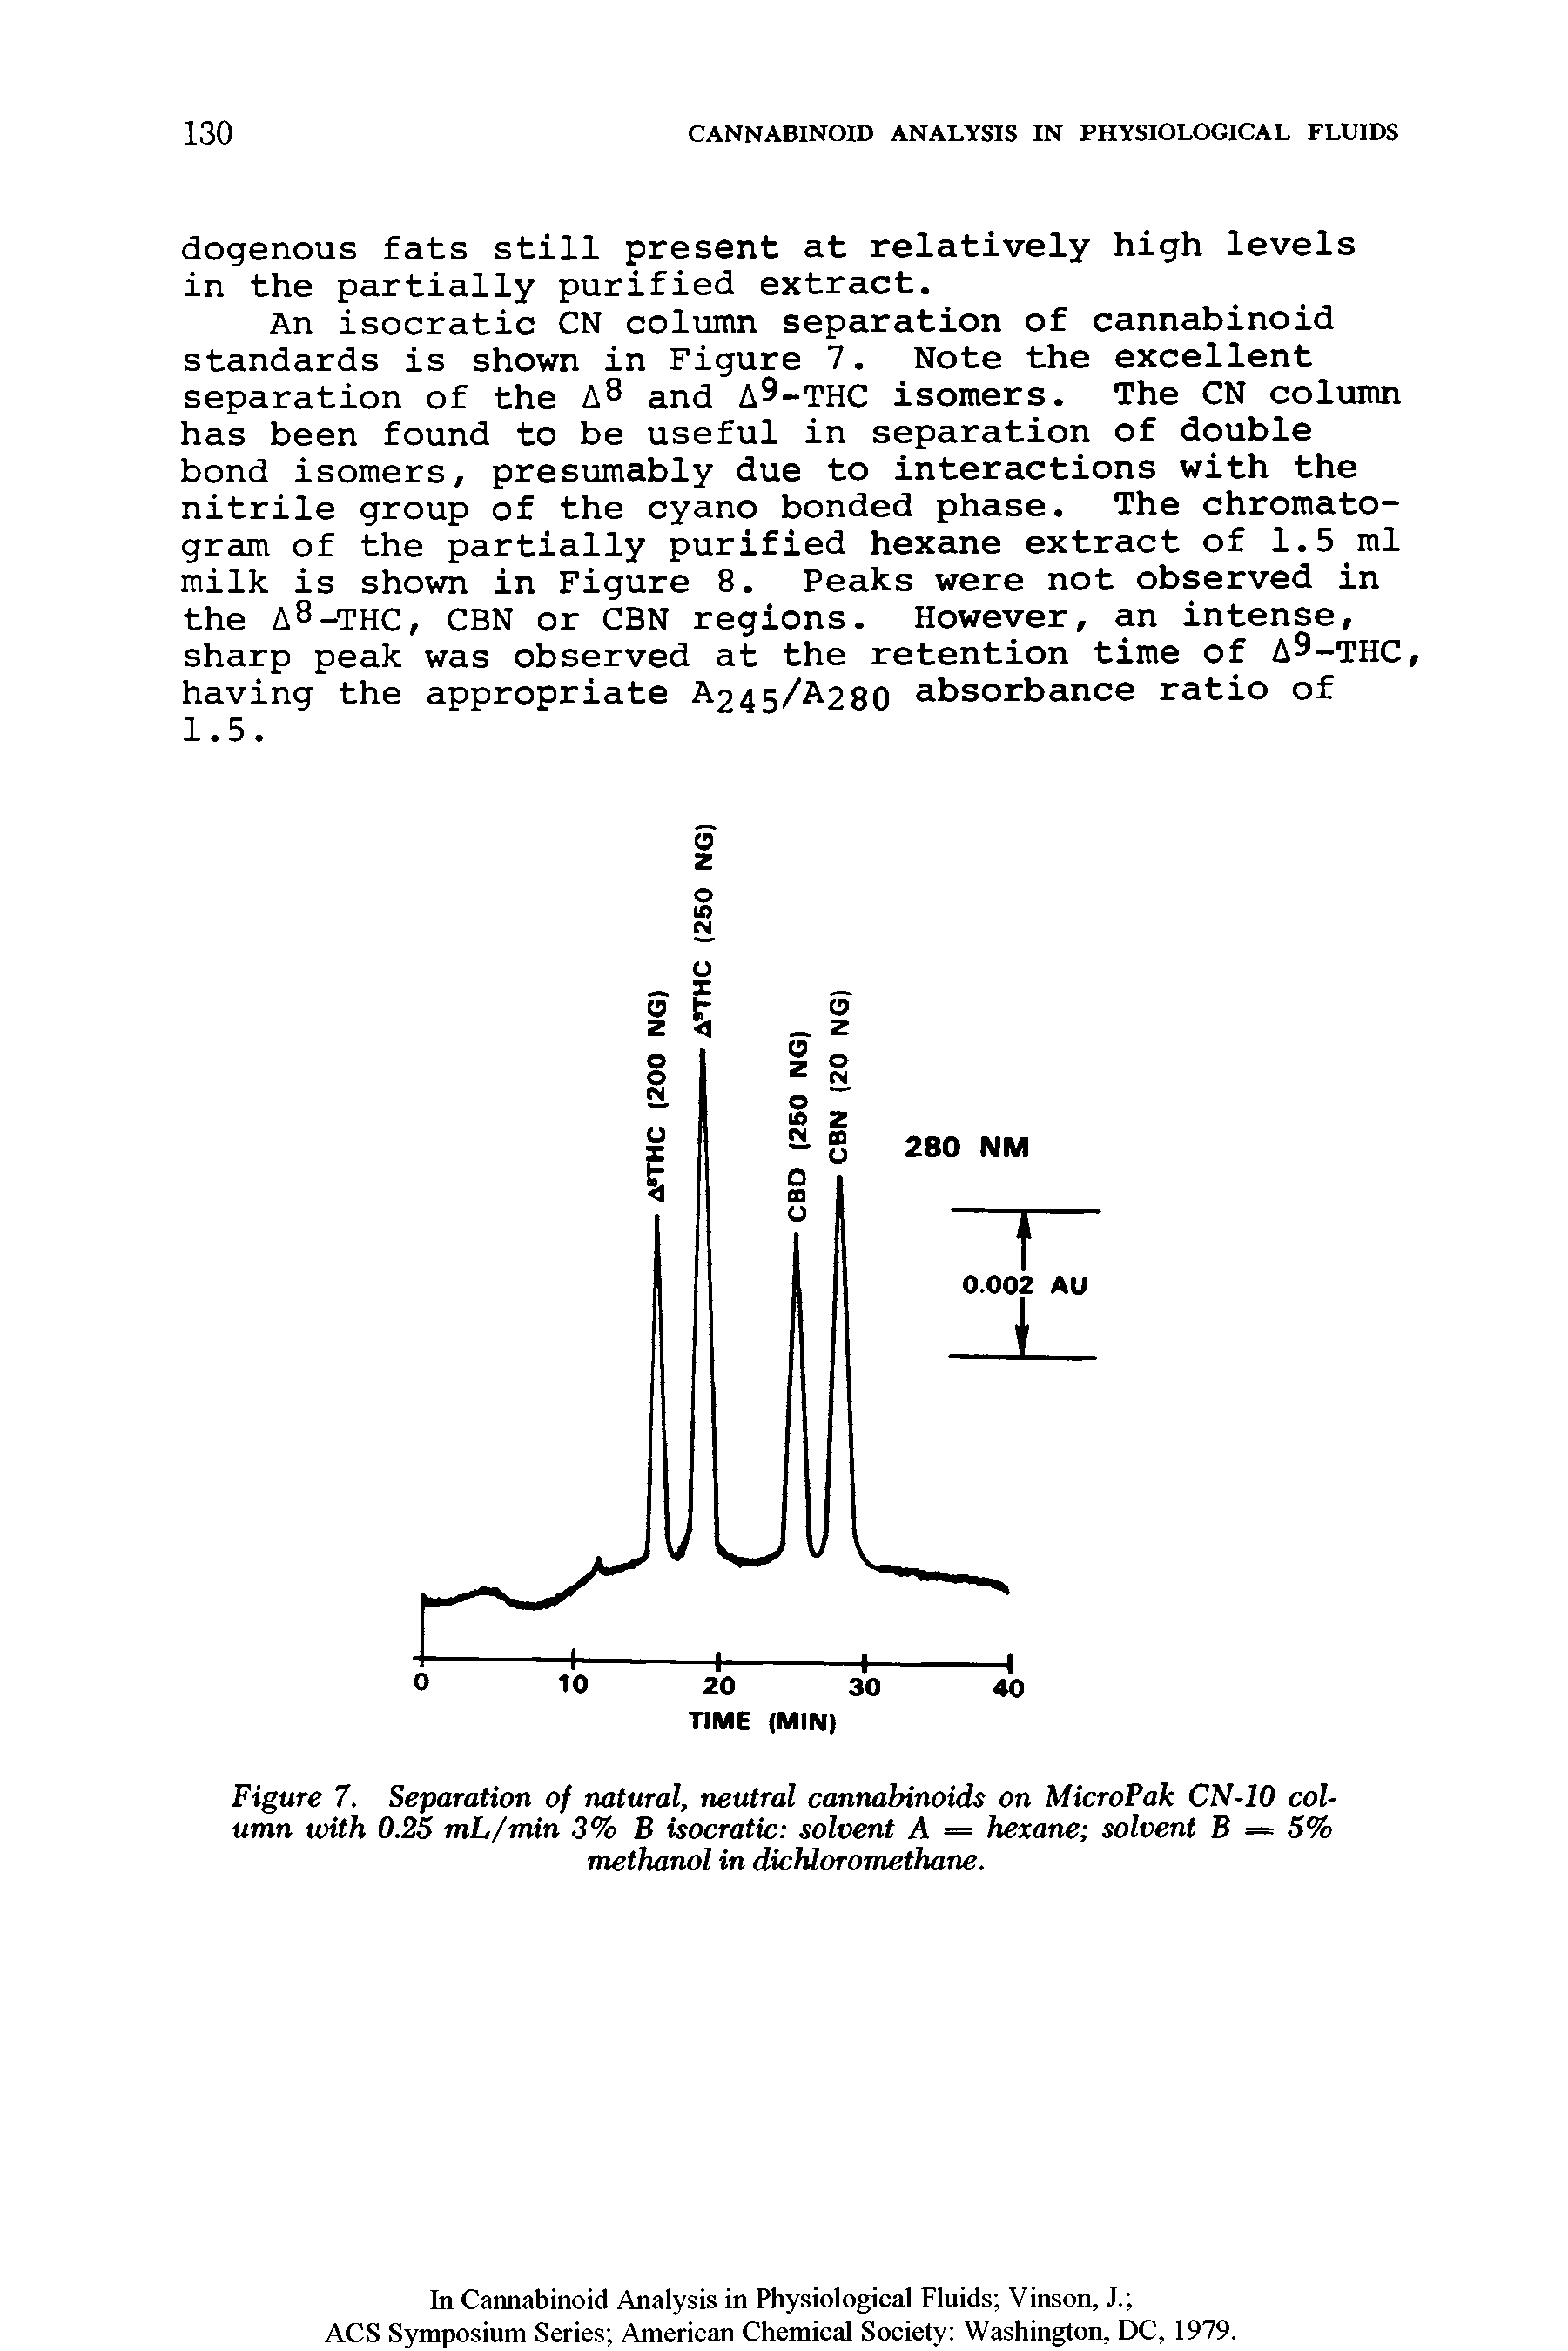 Figure 7. Separation of natural, neutral cannabinoids on MicroPak CN-10 column with 0.25 mh/mvn 3% B isocratic solvent A = hexane solvent B — 5% methanol in dichloromethane.